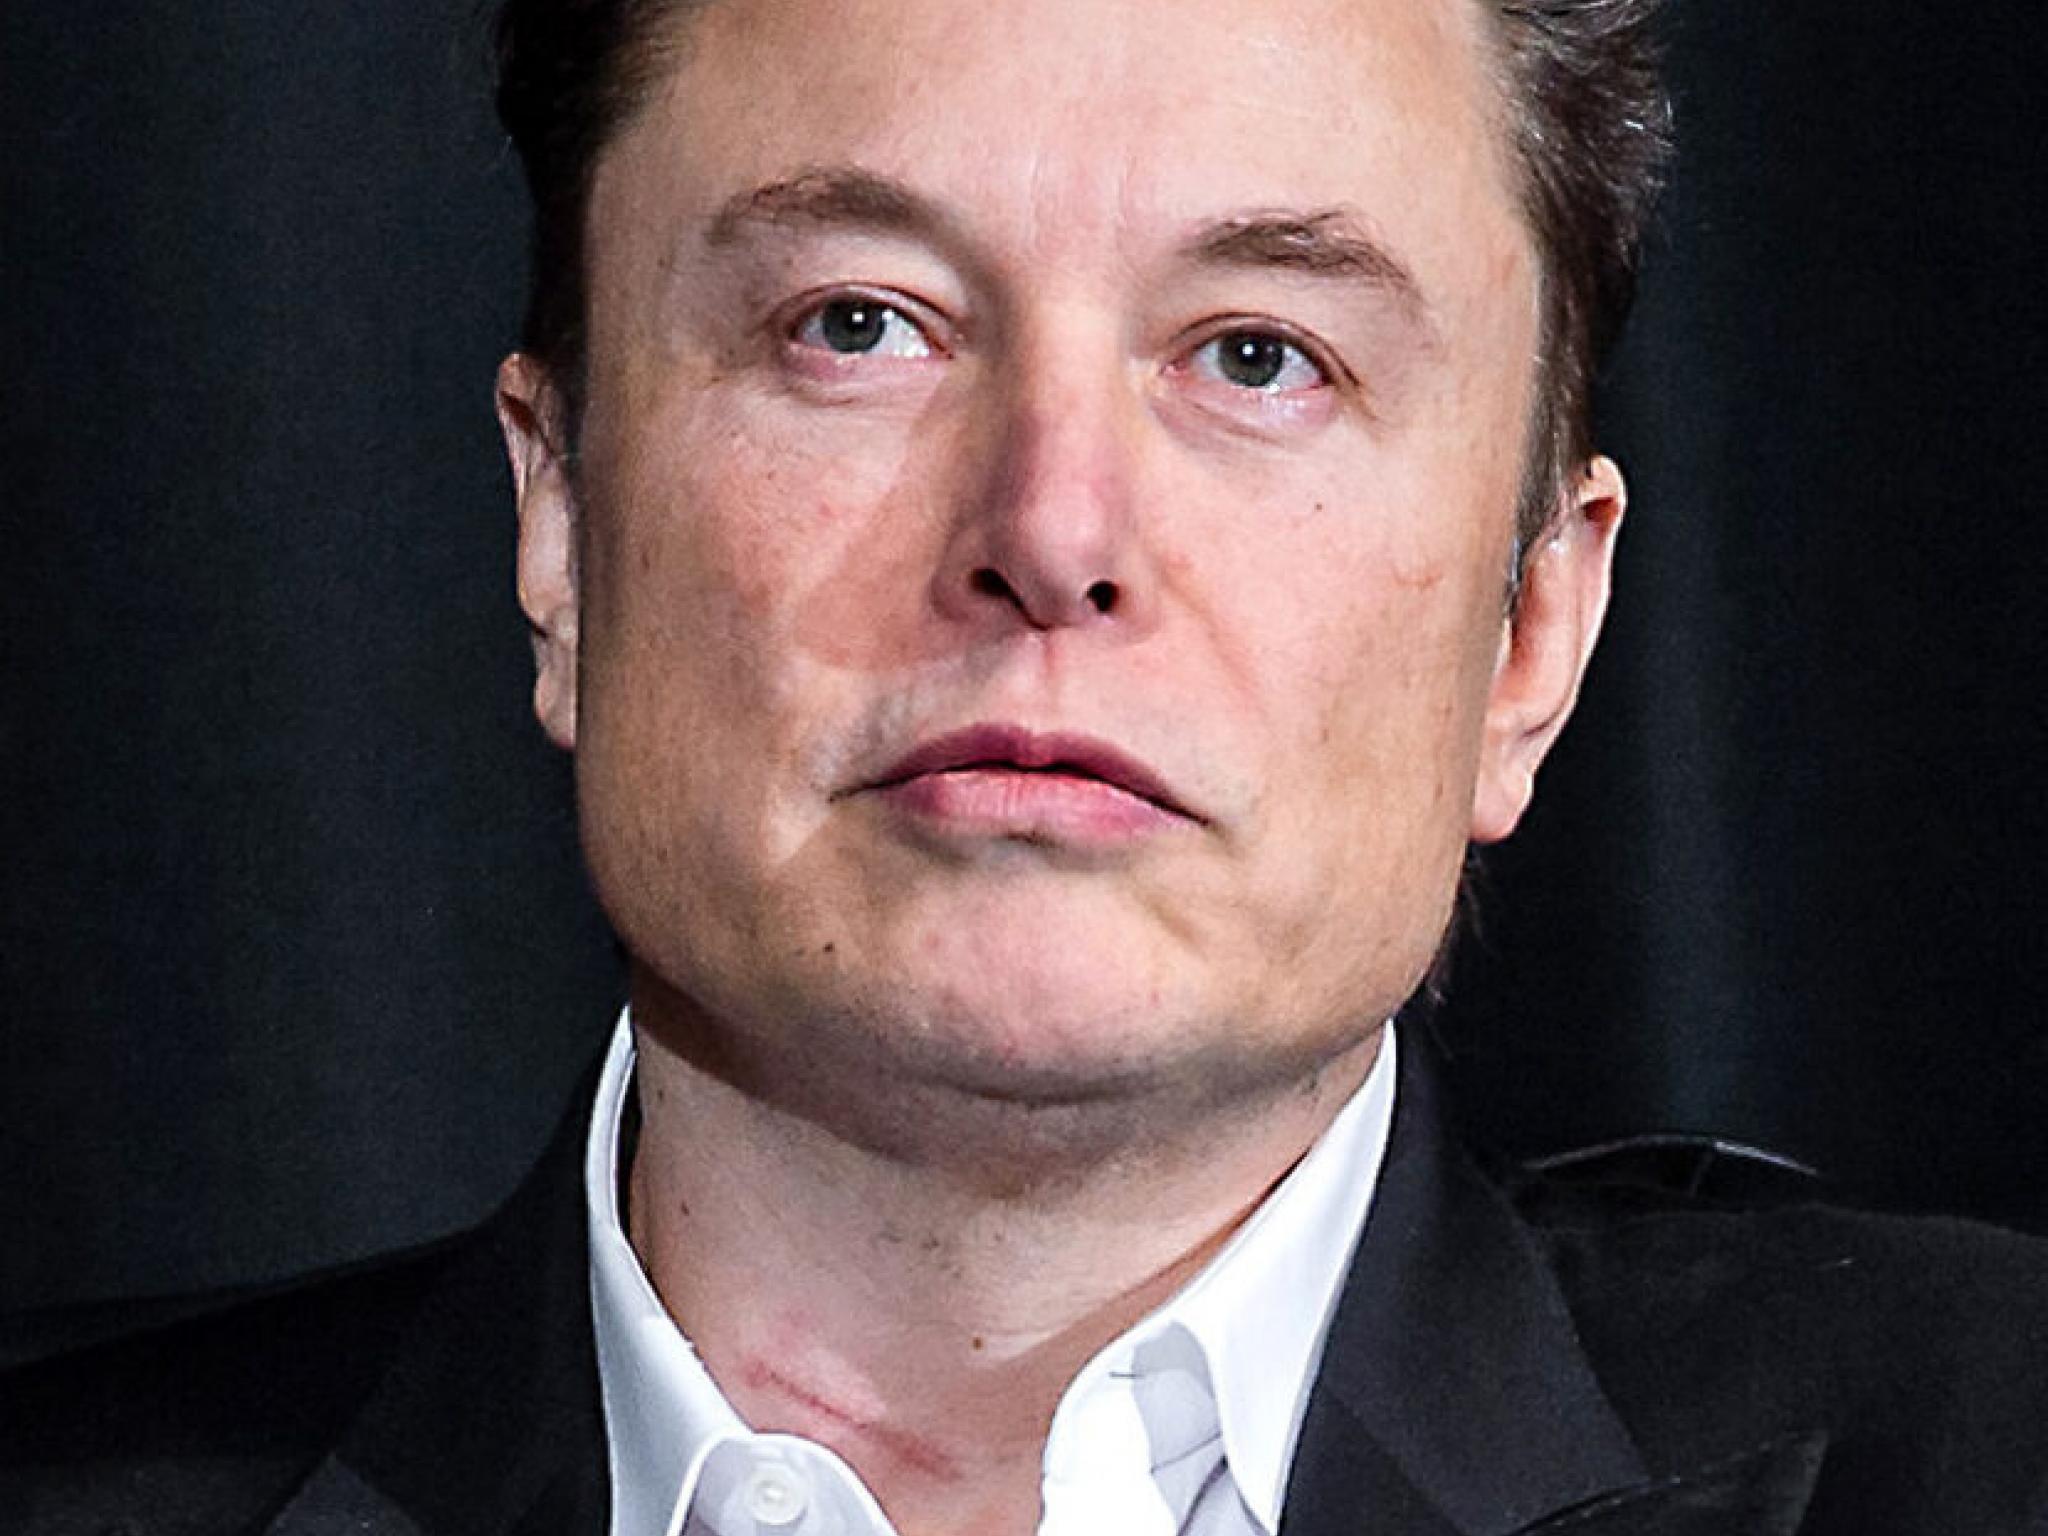  elon-musk-isnt-sure-apples-showed-its-entire-30b-rd-prowess-with-new-ipads-maybe-they-have-some-secret-products 